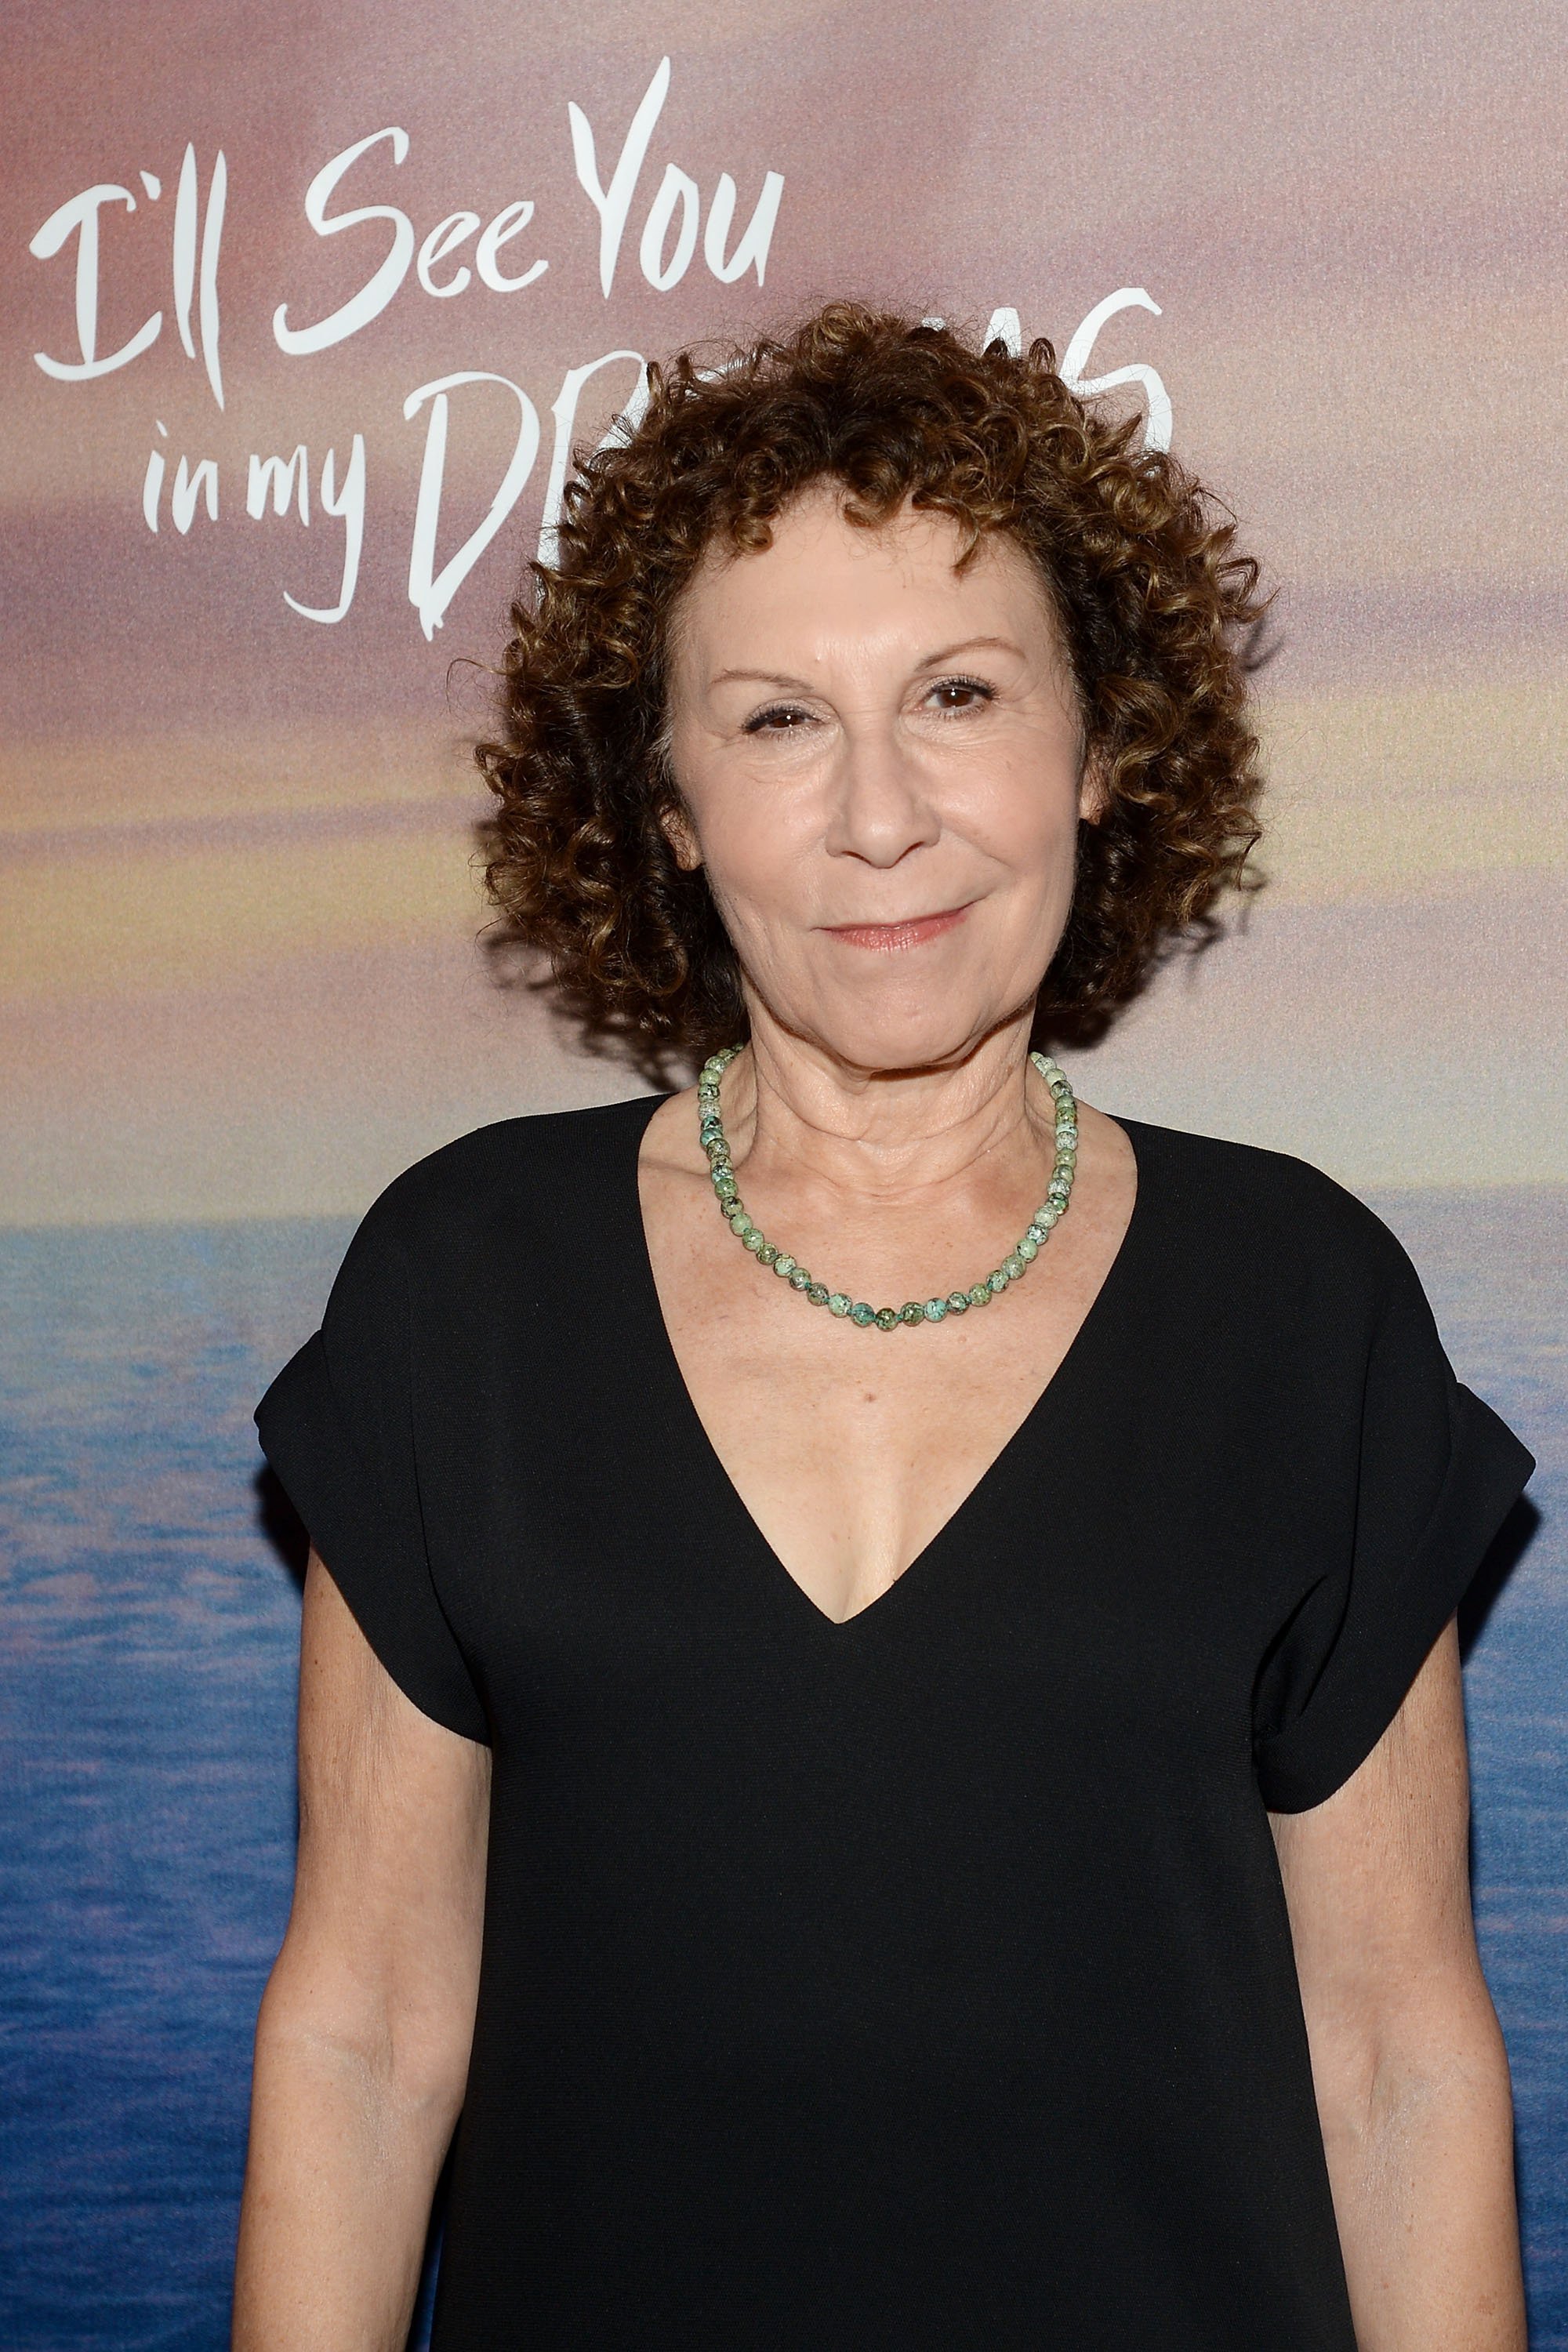 Rhea Perlman attends the "I'll See You In My Dreams" New York Screening. | Source: Getty Images